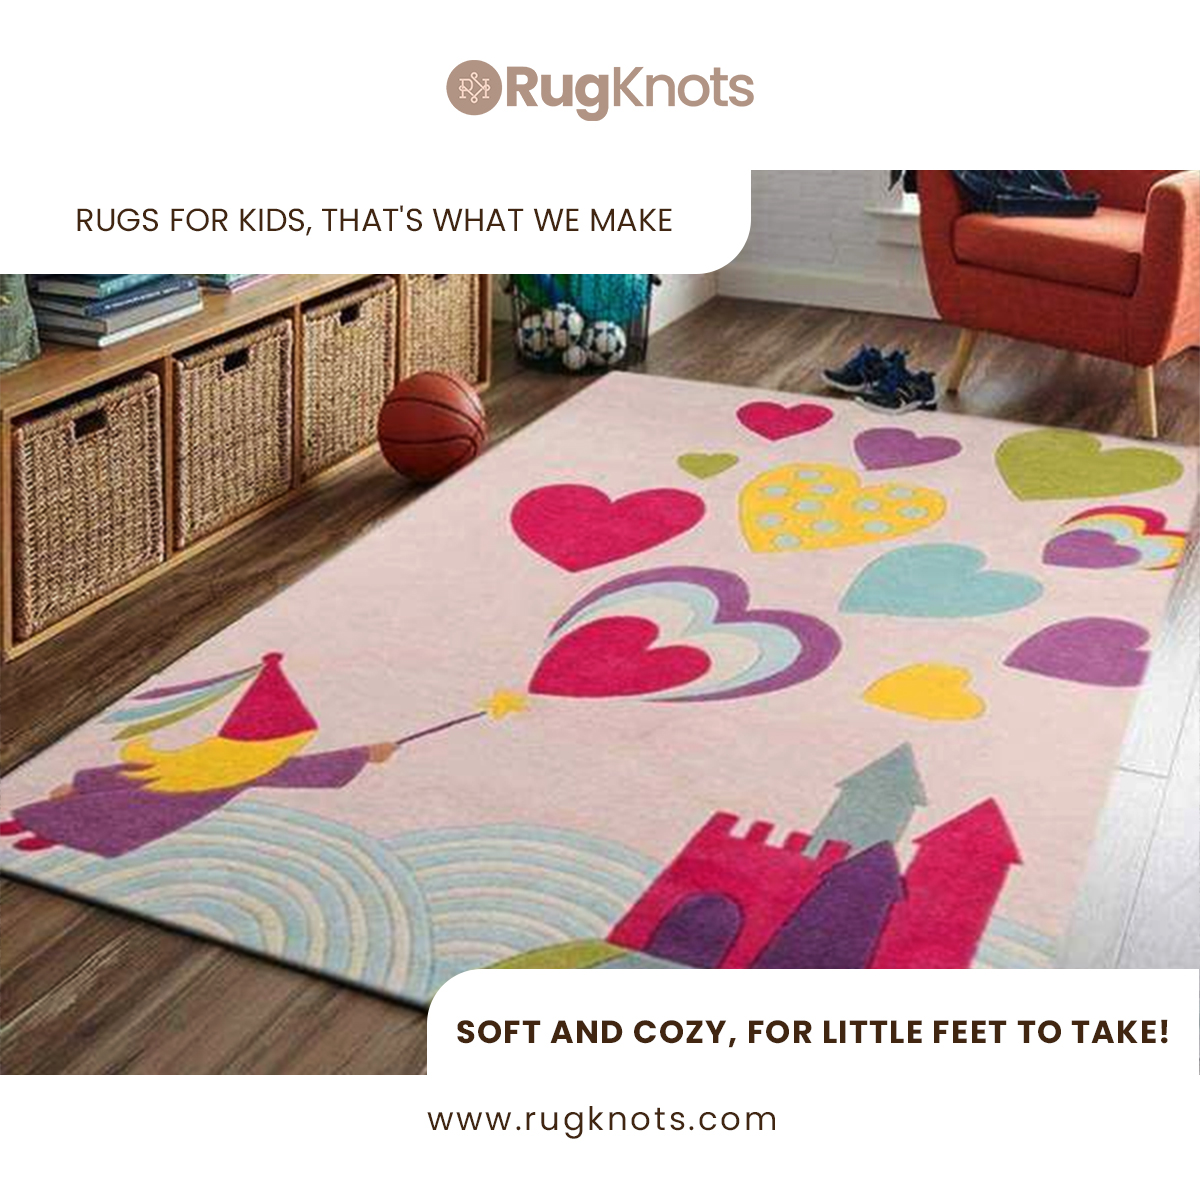 Rugs for kids, that's what we make,
Soft and cozy, for little feet to take!
.
.
rugknots.com/collections/ki…
.
.
#arearugs #Rugsusa #roominspo #homedesigns #decoratingtips #decortips #lovehome #interiordesign #homedecorations #interiordesigner #TTPD #lover #Gollum #USA #Afghanistan